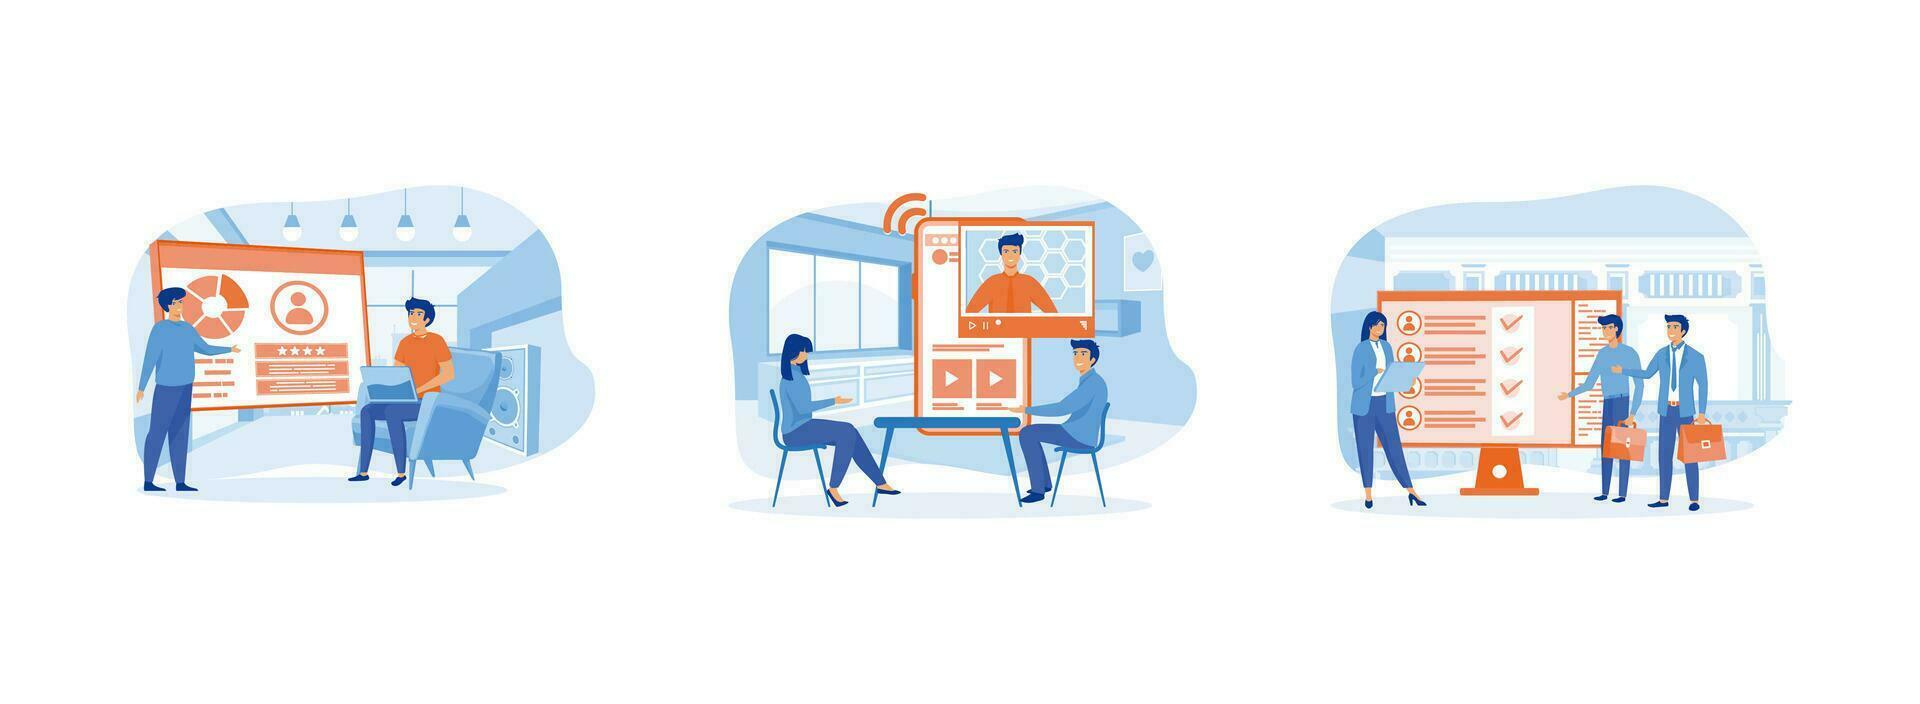 Business conveyor online service. Business planning and development. Business recruitment and employee control. Online service 1 flat vector modern illustration